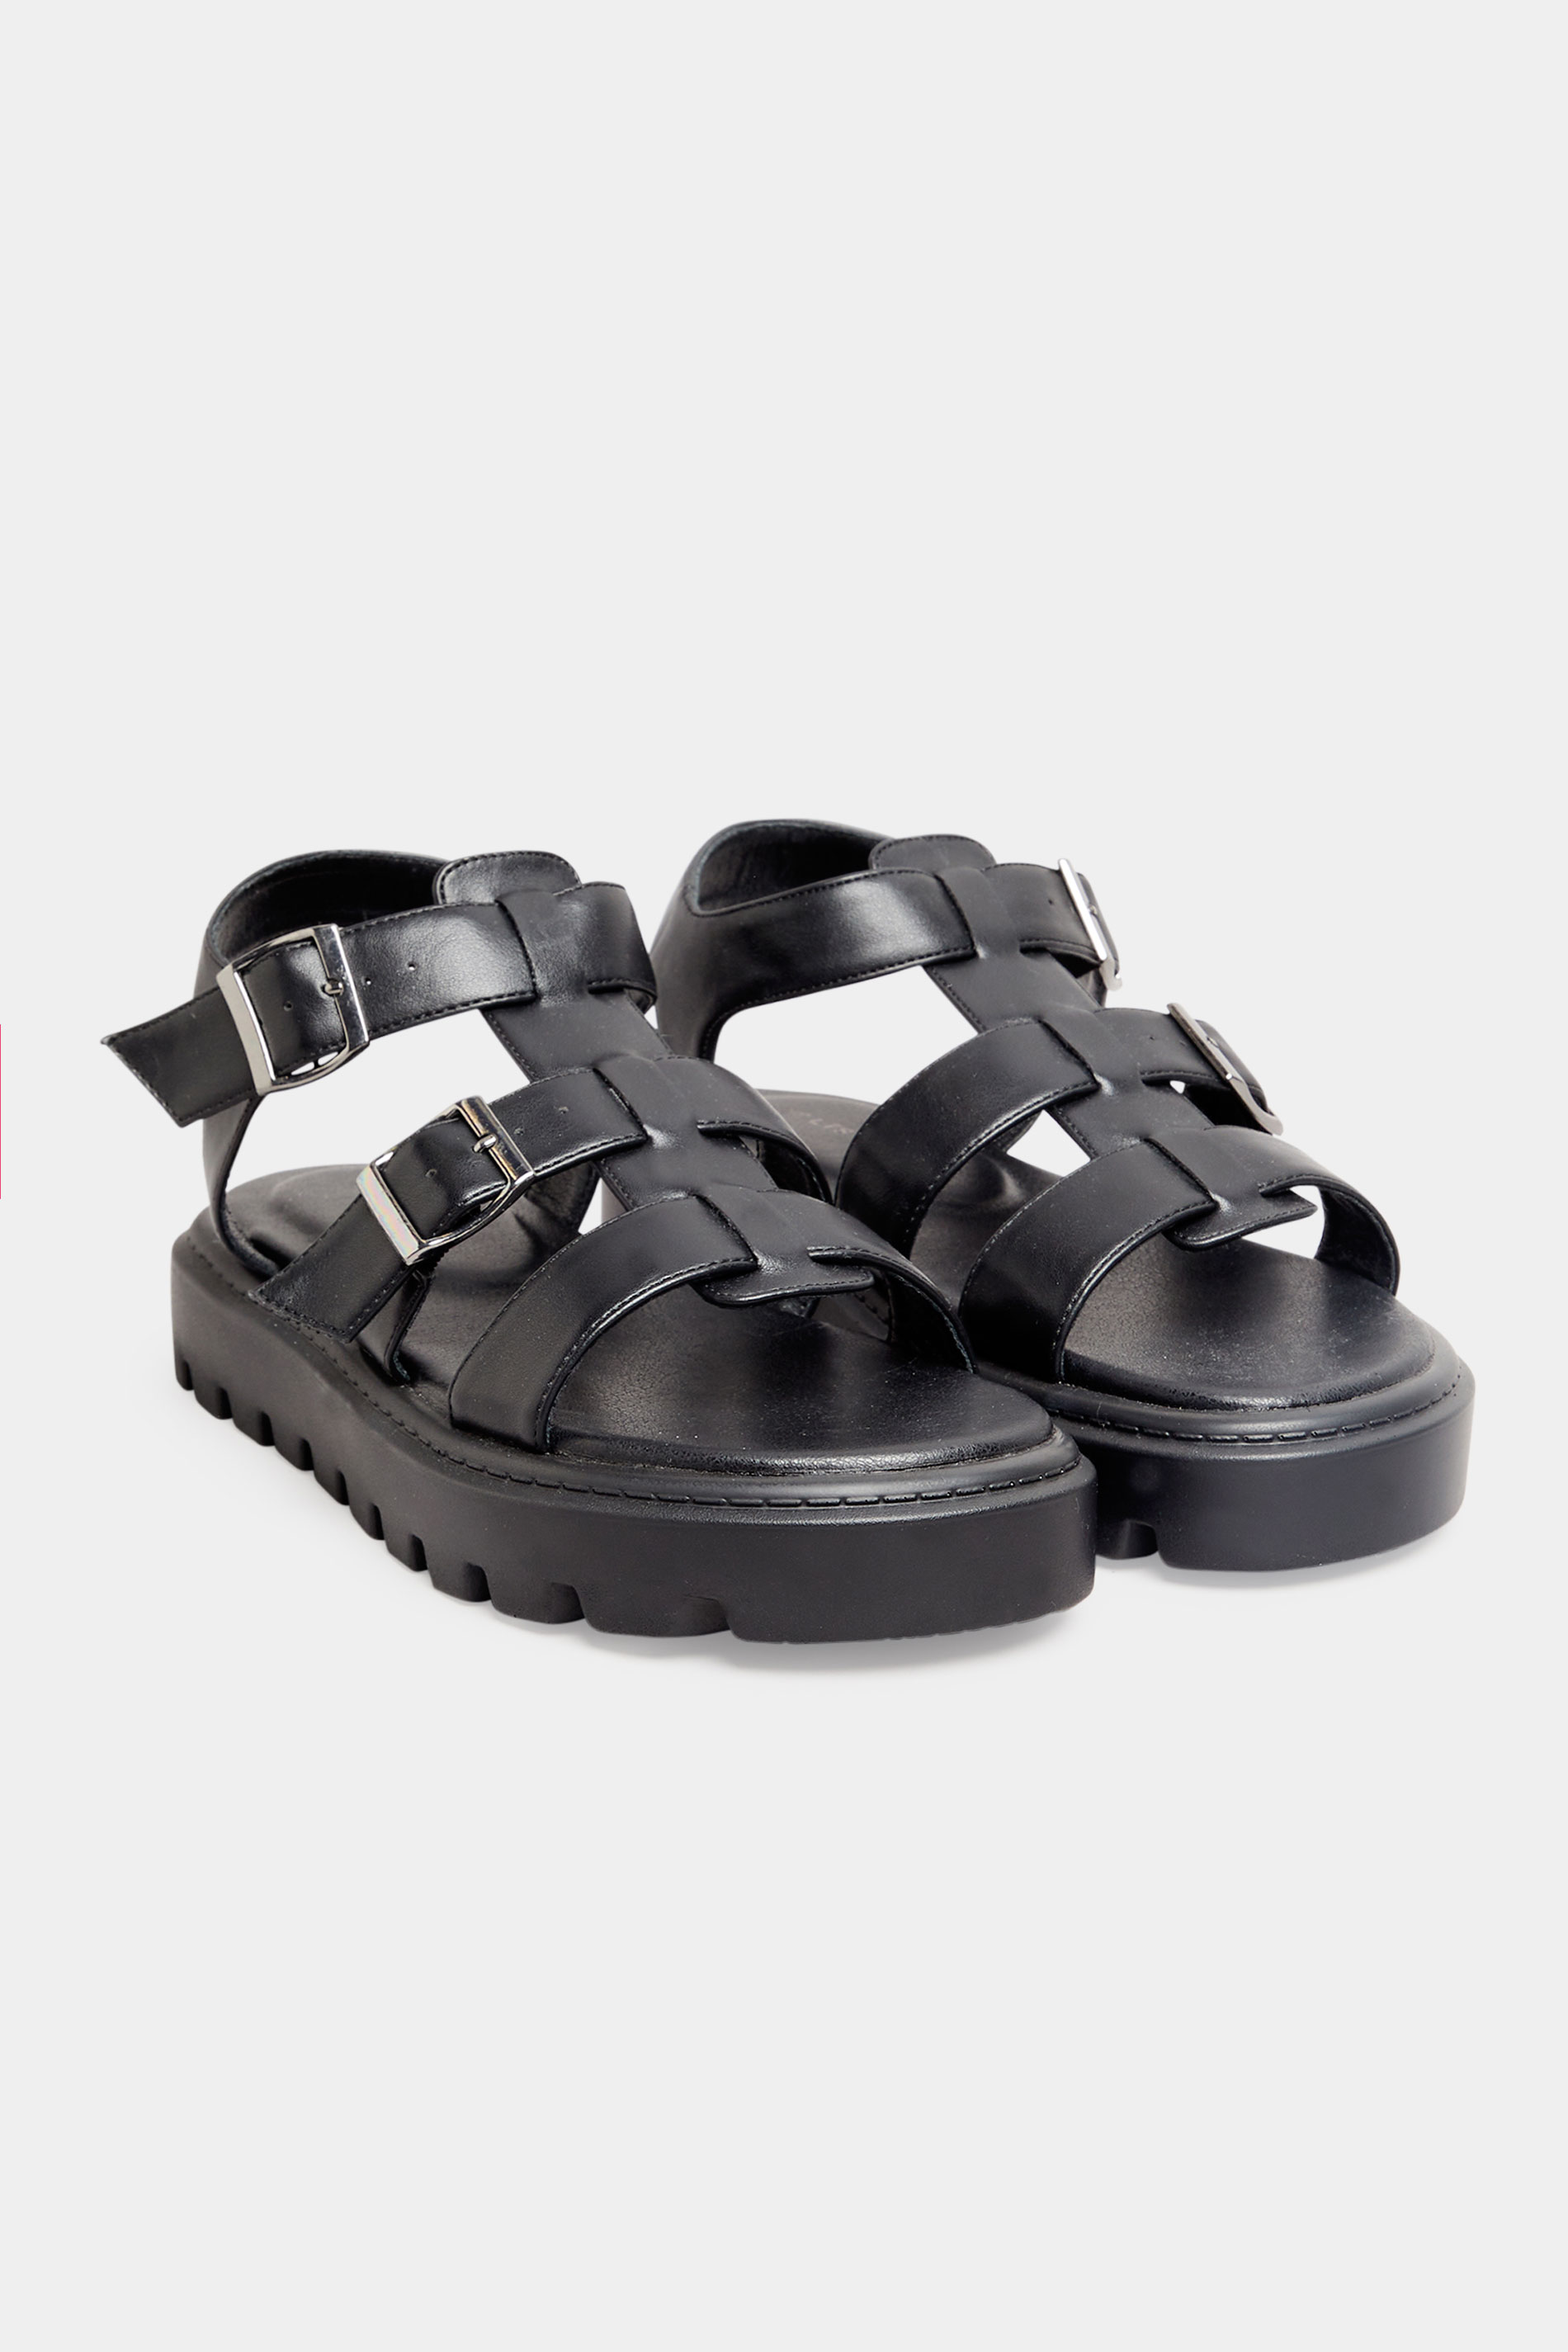 Grande taille  Sandals Grande taille  Flat Sandals | LTS Tall Black Gladiator Sandals In Standard D Fit - NH07303